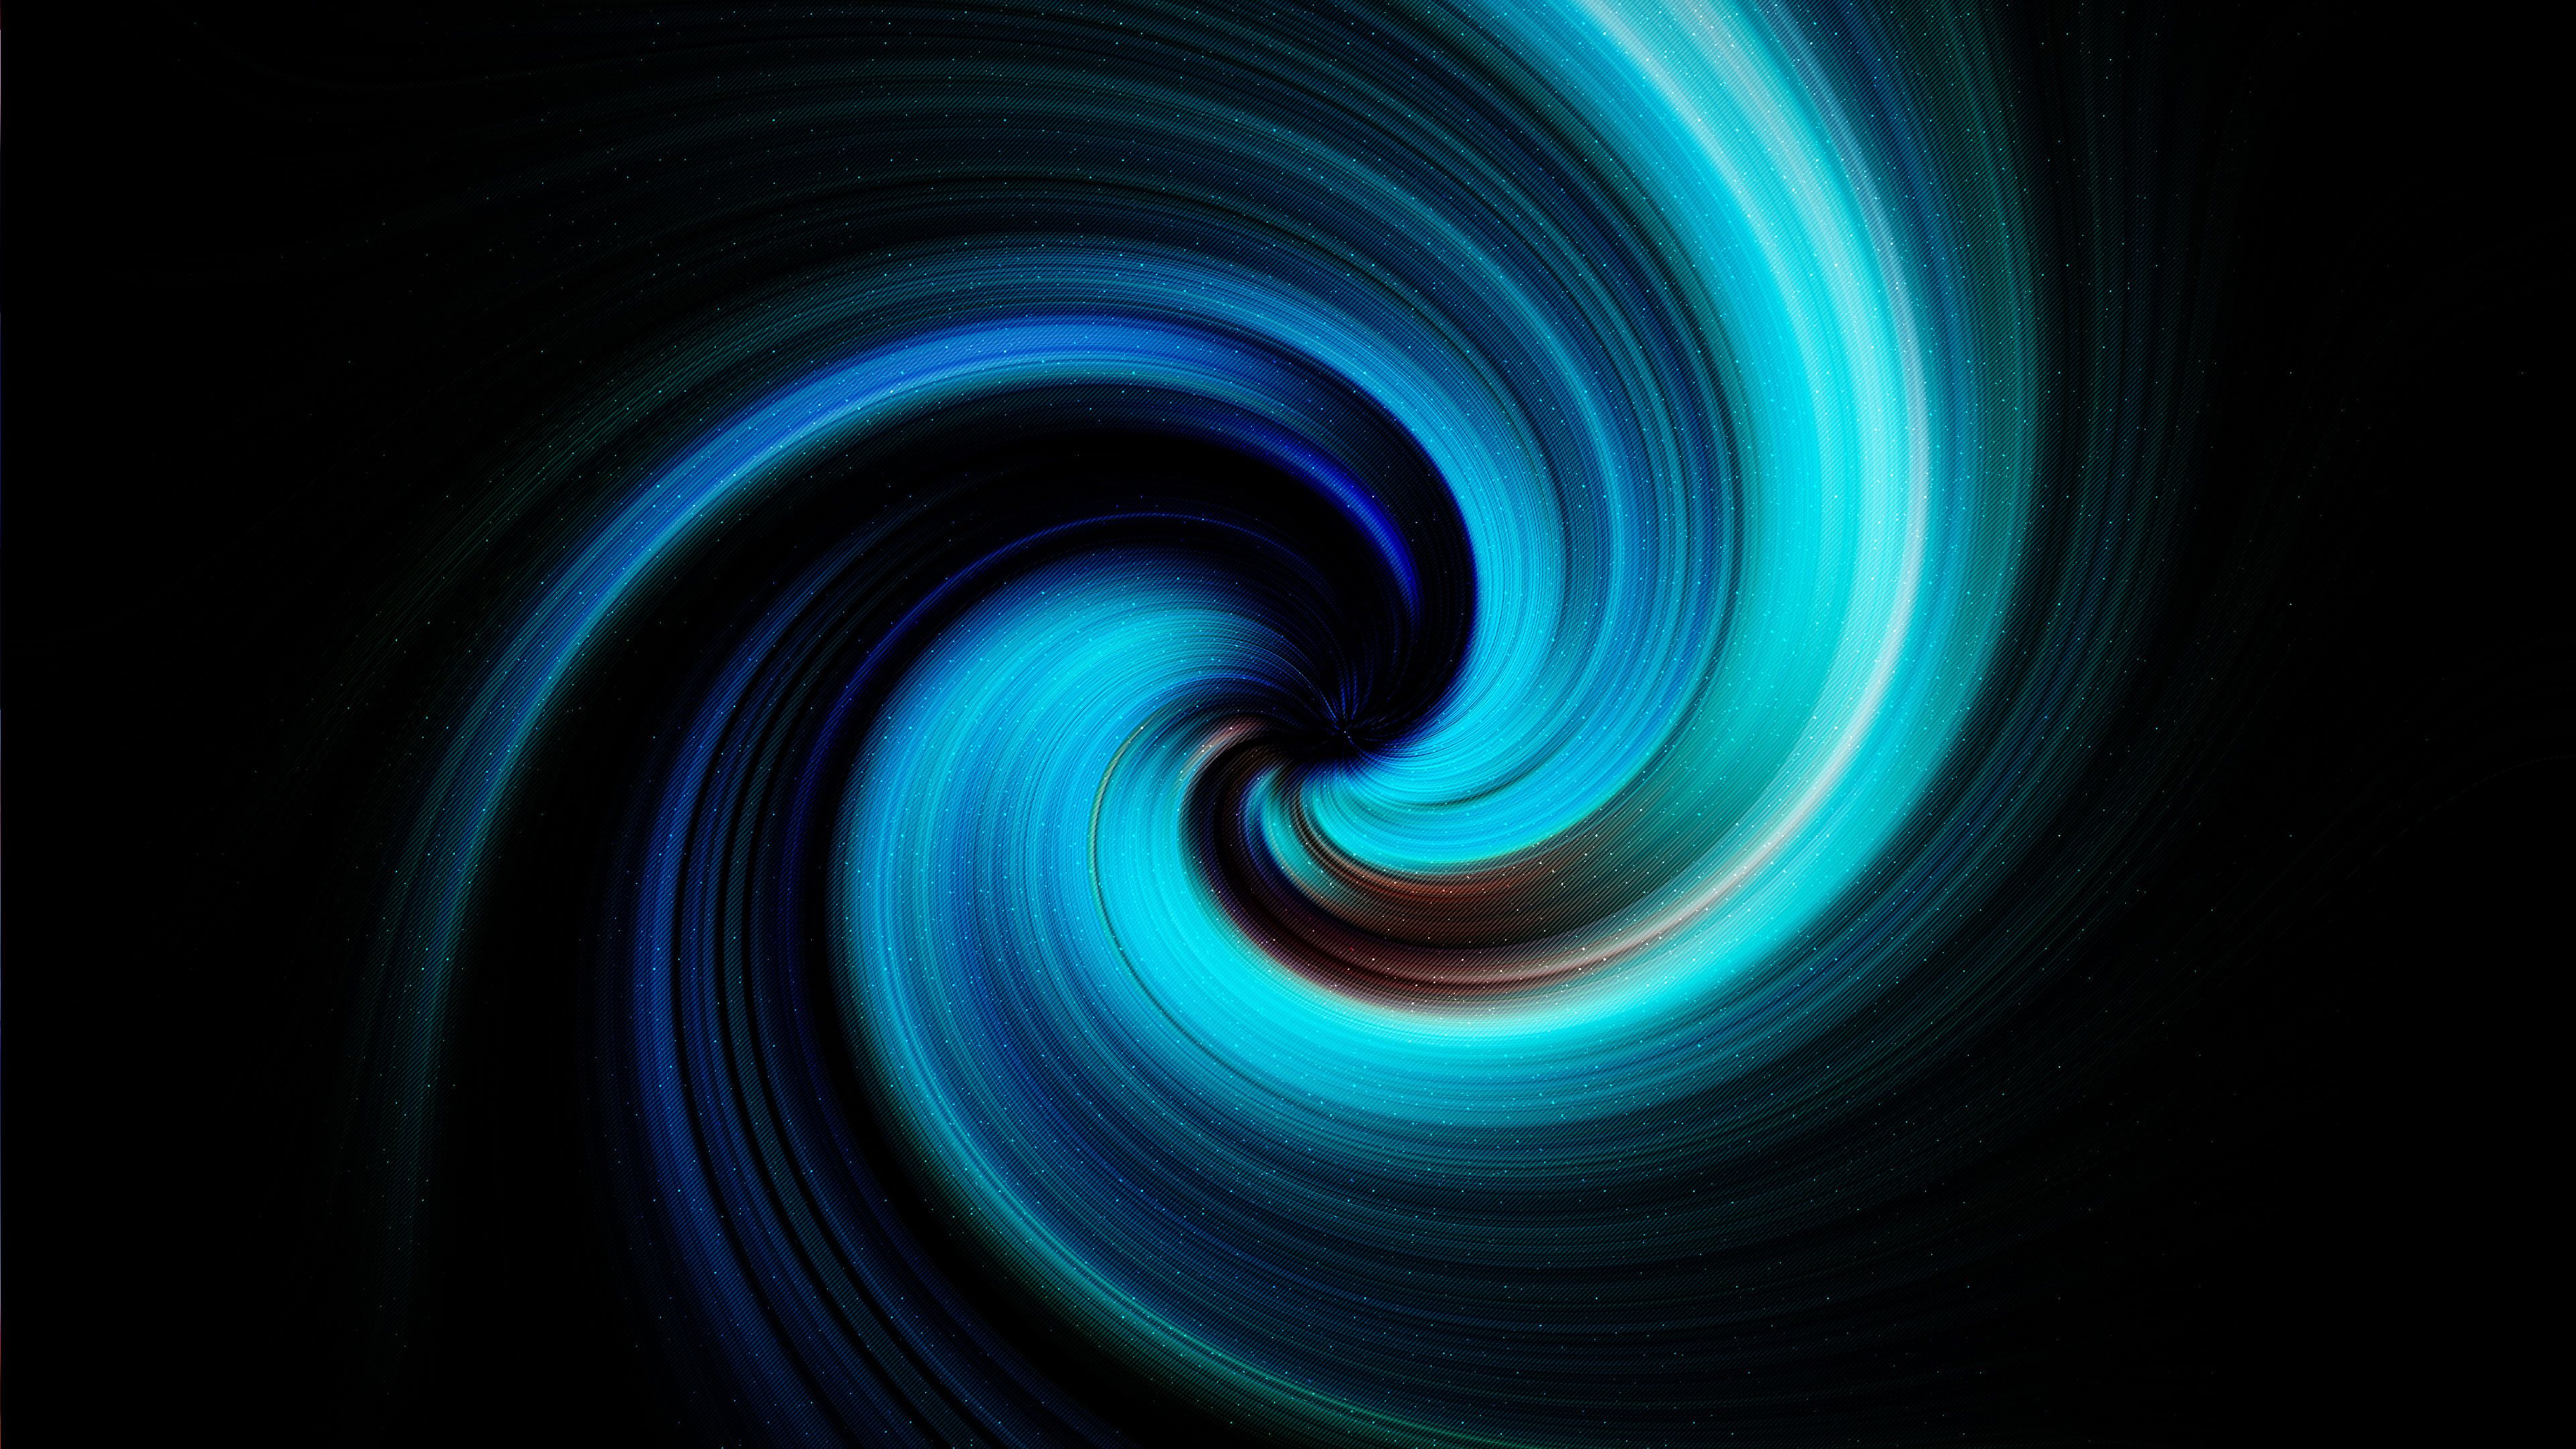 Abstract Spiral Spin Wallpapers